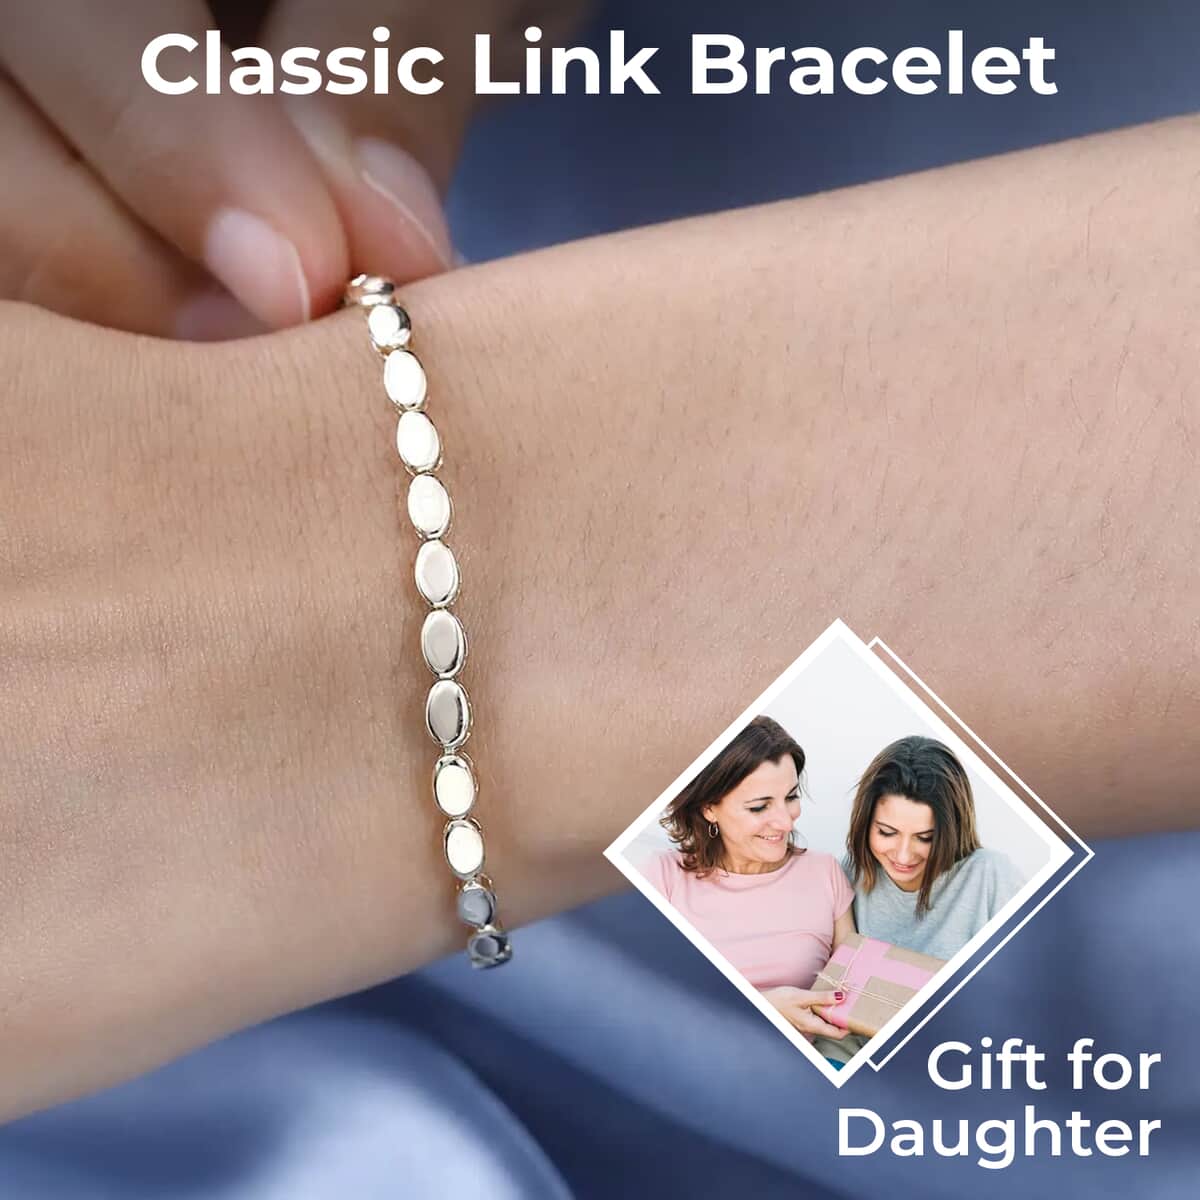 Luxoro 10K Yellow Gold Bracelet,  Oval Link Bracelet, Gold Link Bracelet, Gold Bracelet For Her, Gold Jewelry For Her (7.25 In) 3.8 Grams image number 2